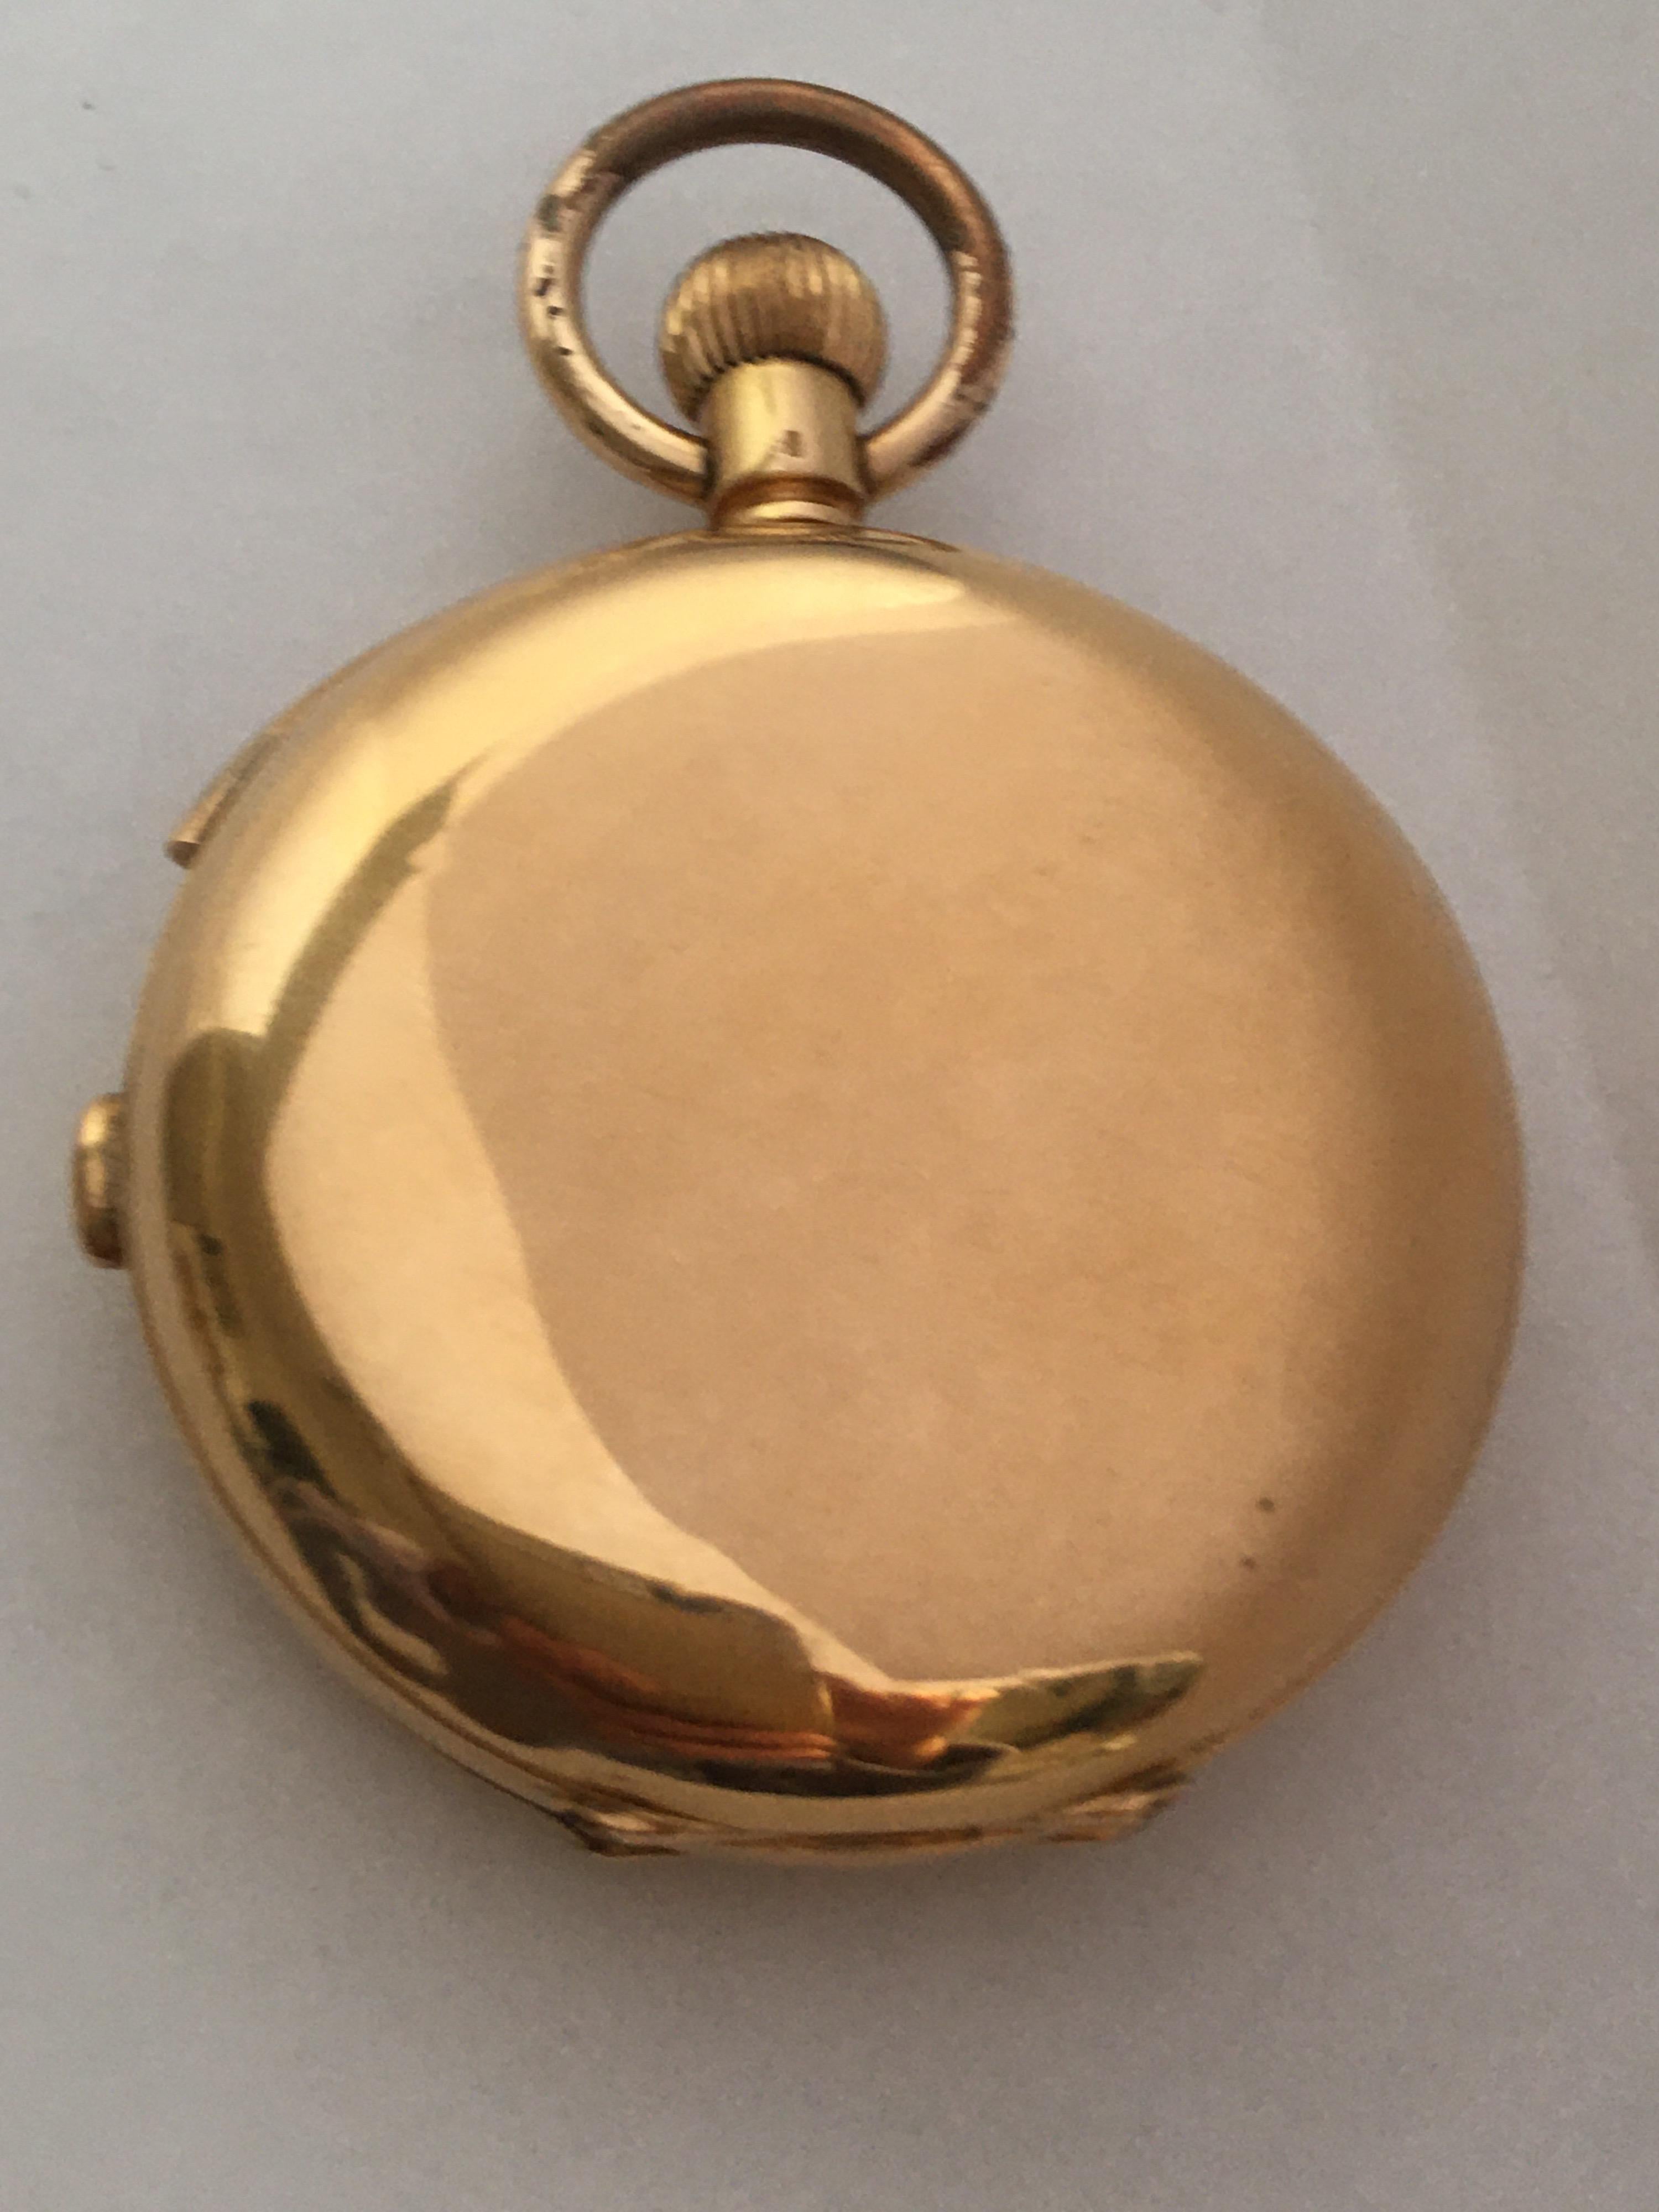 This Very fine & Elegant yet amazing complex work of a Pocket Watch with its stopwatch / chronograph mechanism and it finest strikes on a gong repeater work just a perfect combination of most complicated & collectible pocket watch. It sits on an 18K